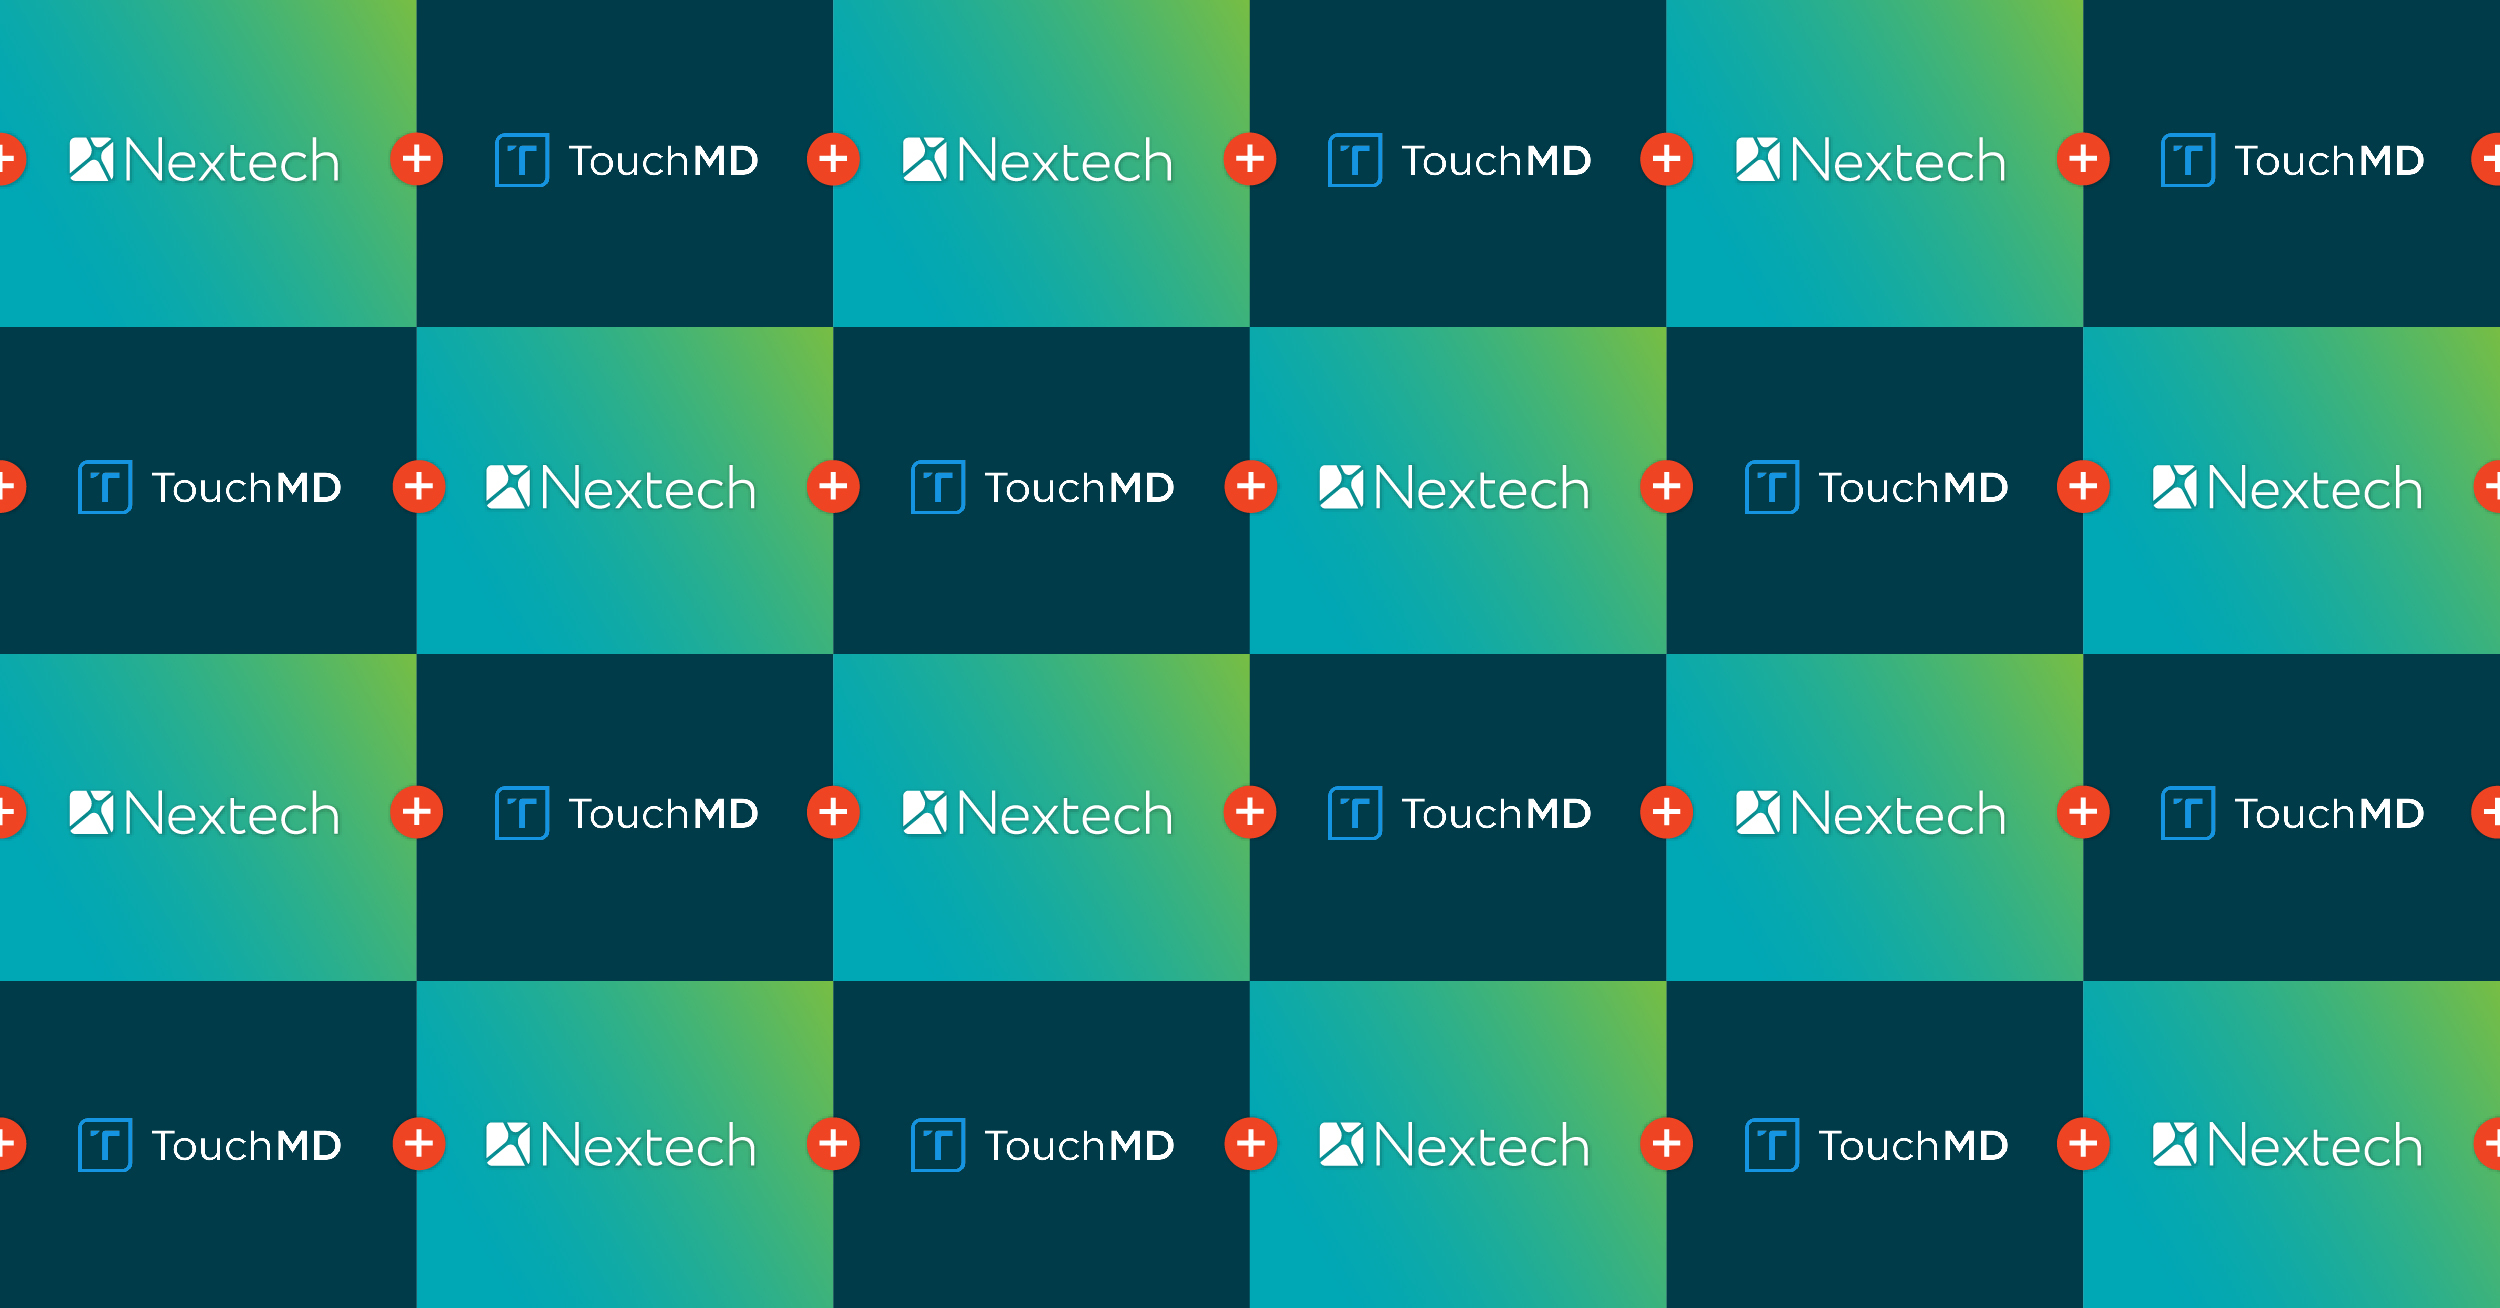 6 Things to Know About Nextech’s Latest Acquisition of TouchMD